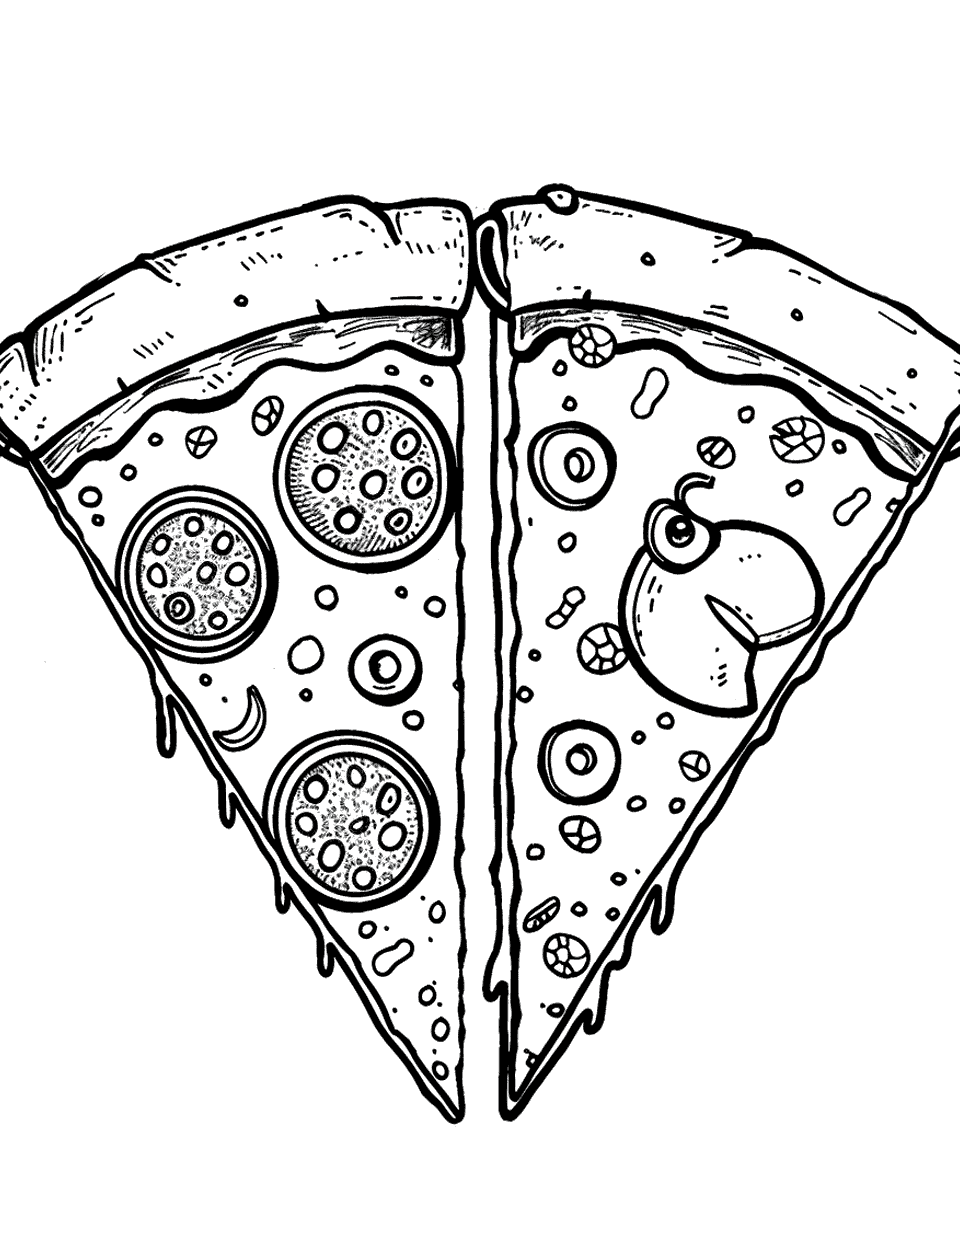 Pizza Slices Coloring Page - Two pizza slices with one being pepperoni and the other vegetarian.